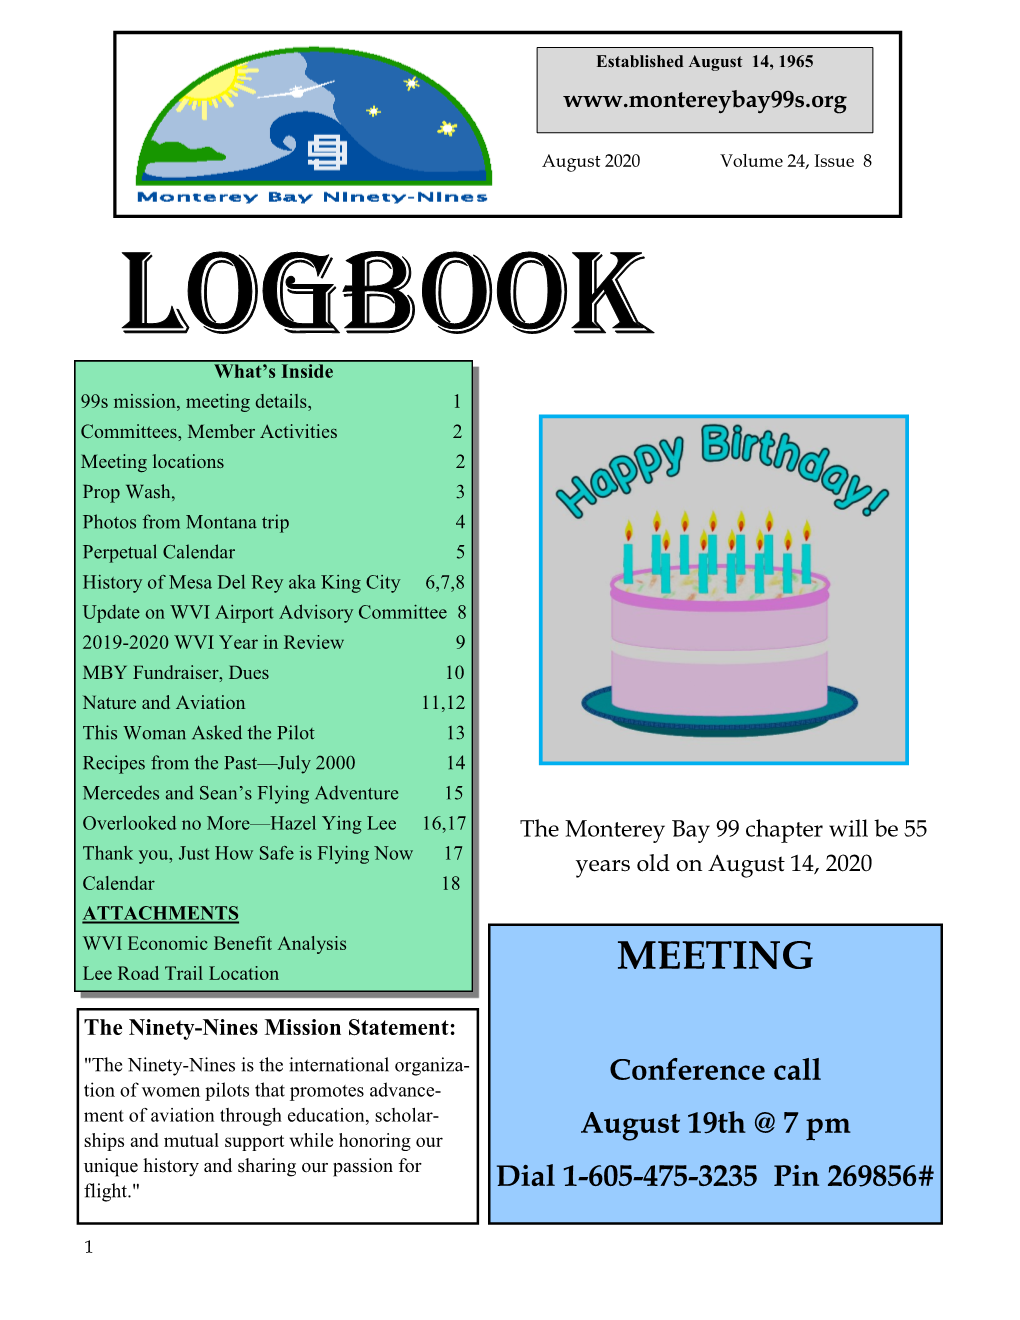 August 2020 Volume 24, Issue 8 Logbook What’S Inside 99S Mission, Meeting Details, 1 Committees, Member Activities 2 Meeting Locations 2